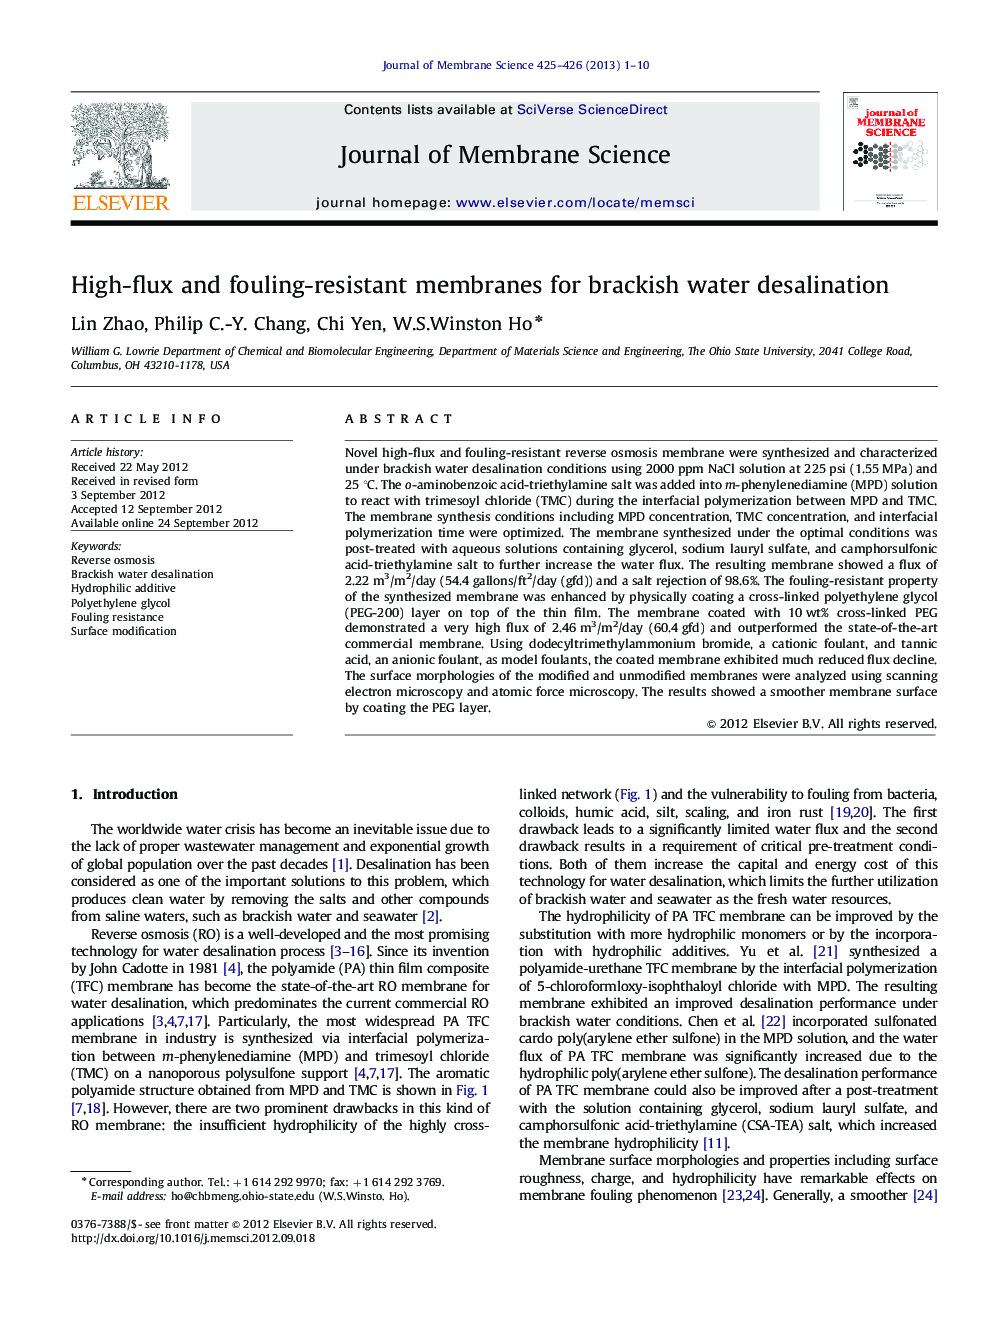 High-flux and fouling-resistant membranes for brackish water desalination